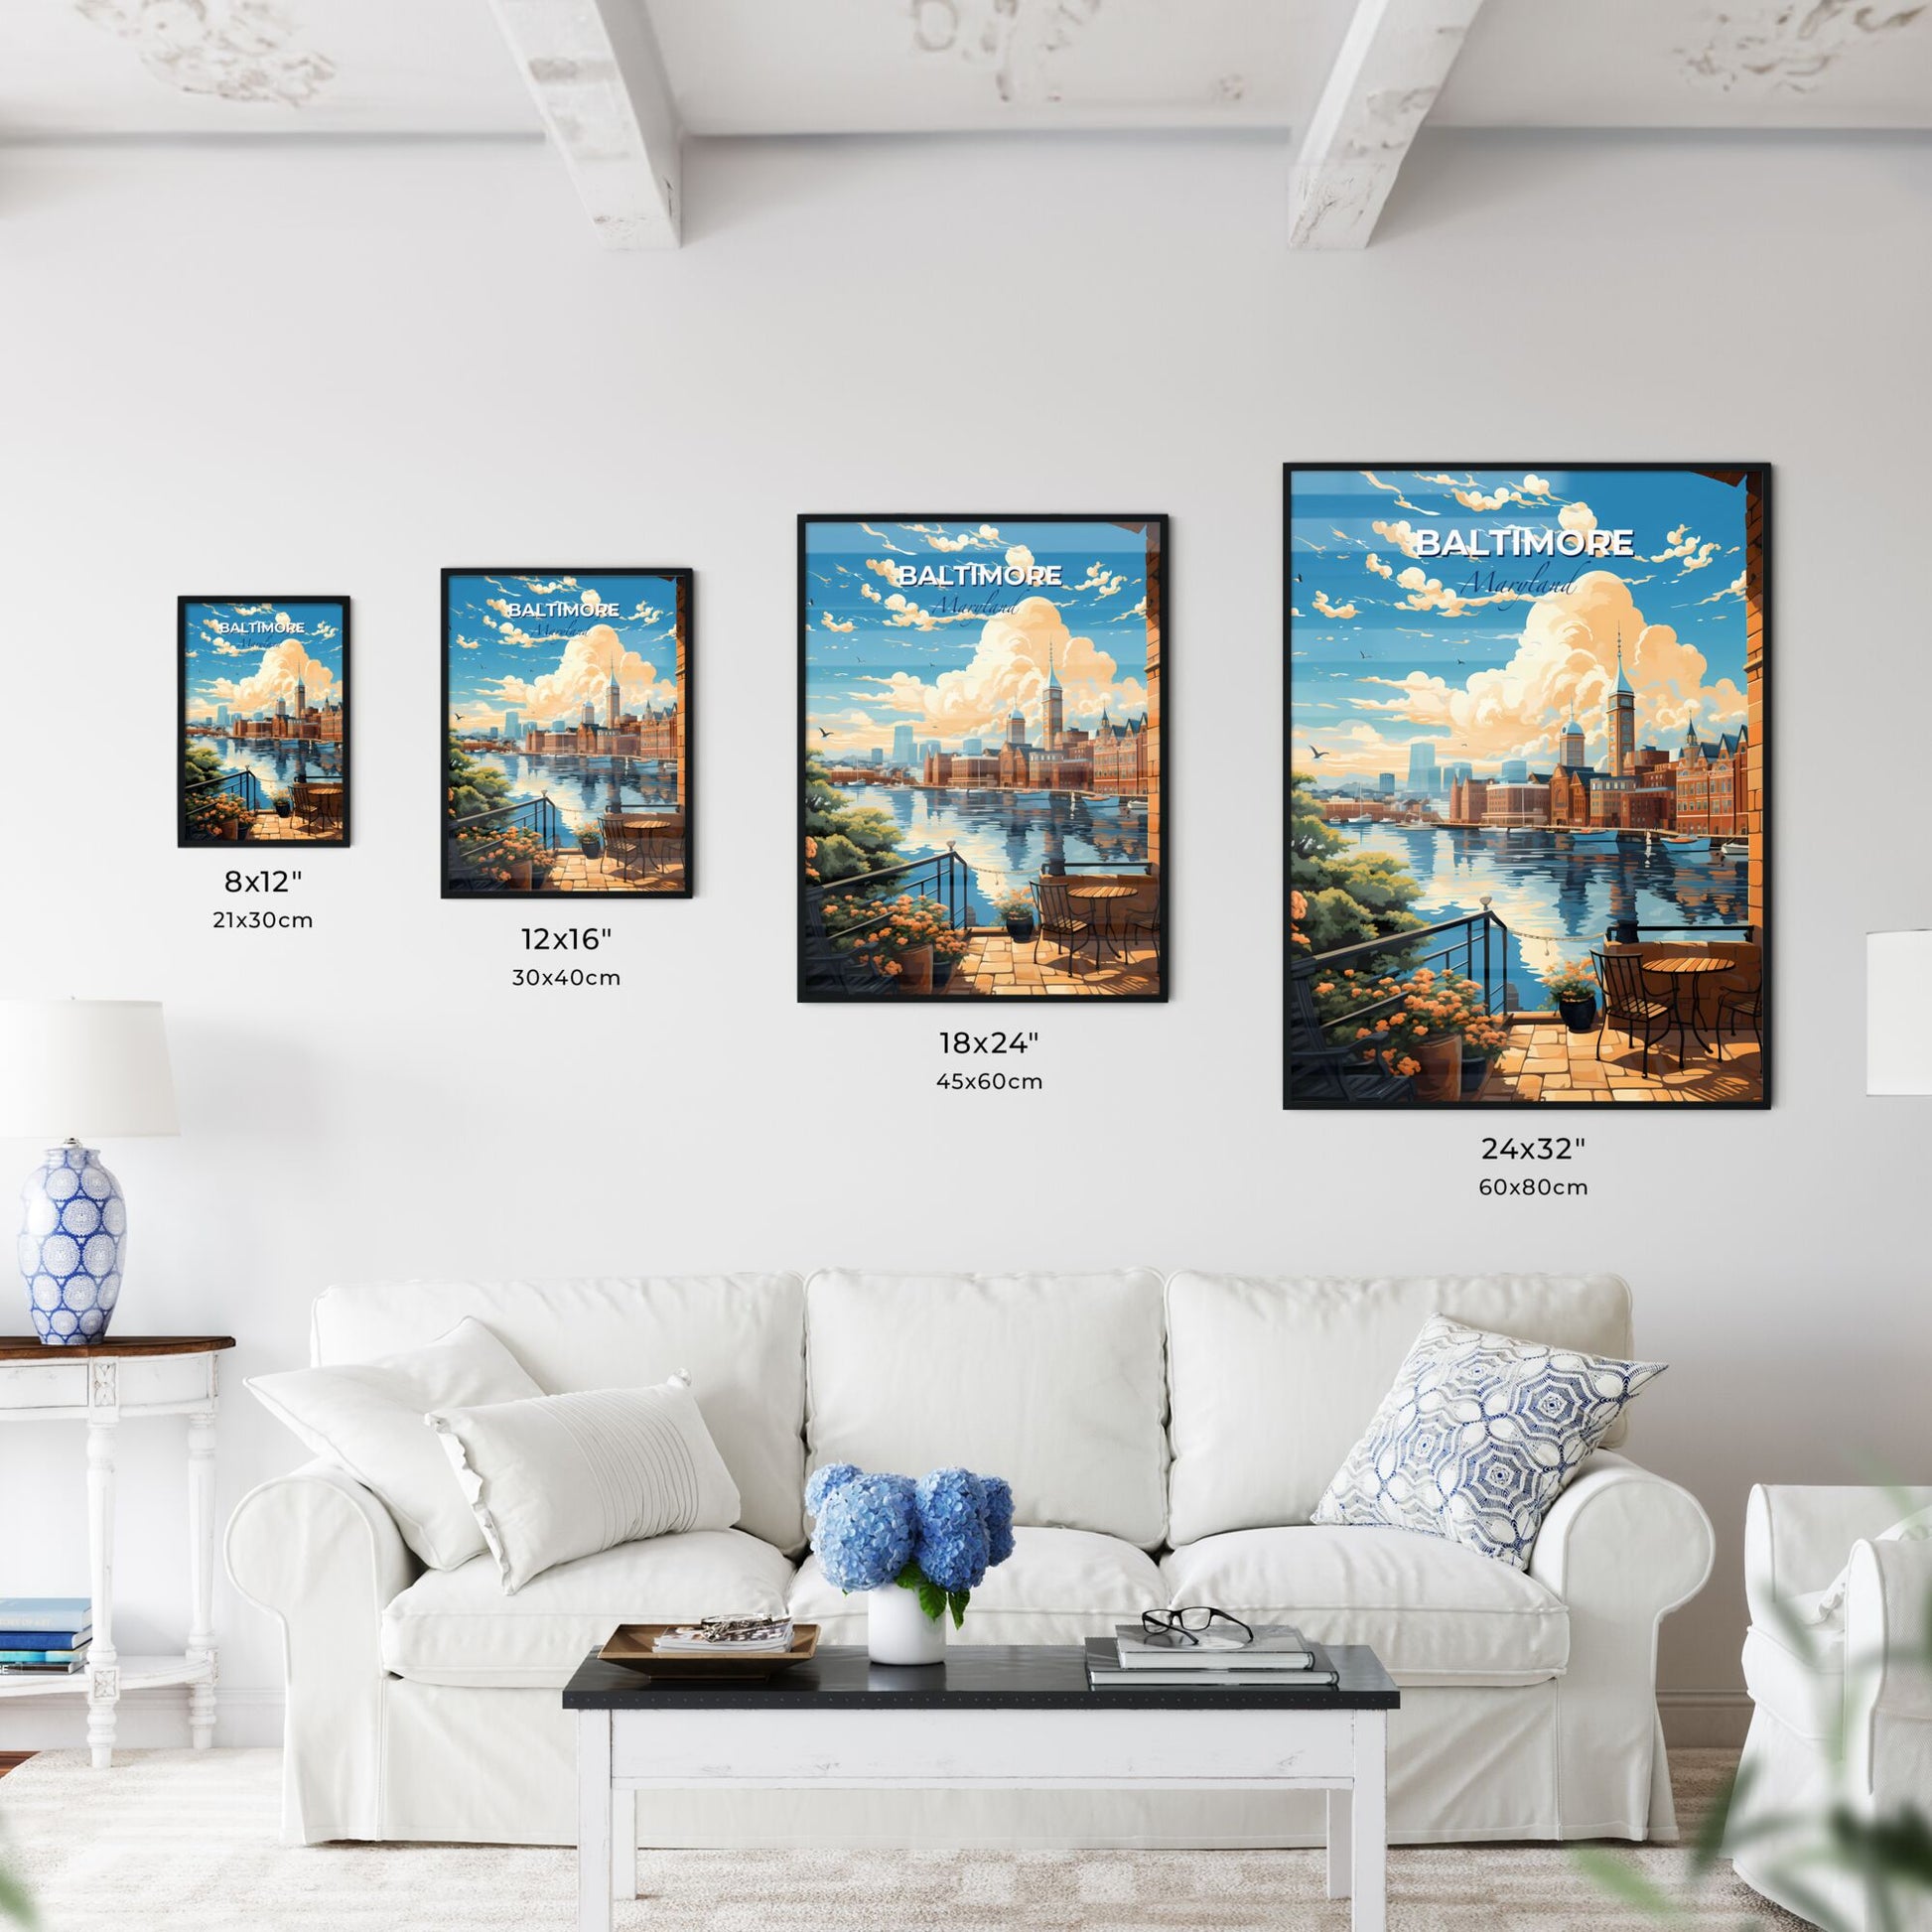 Baltimore Maryland Skyline - A View Of A City From A Balcony - Customizable Travel Gift Default Title